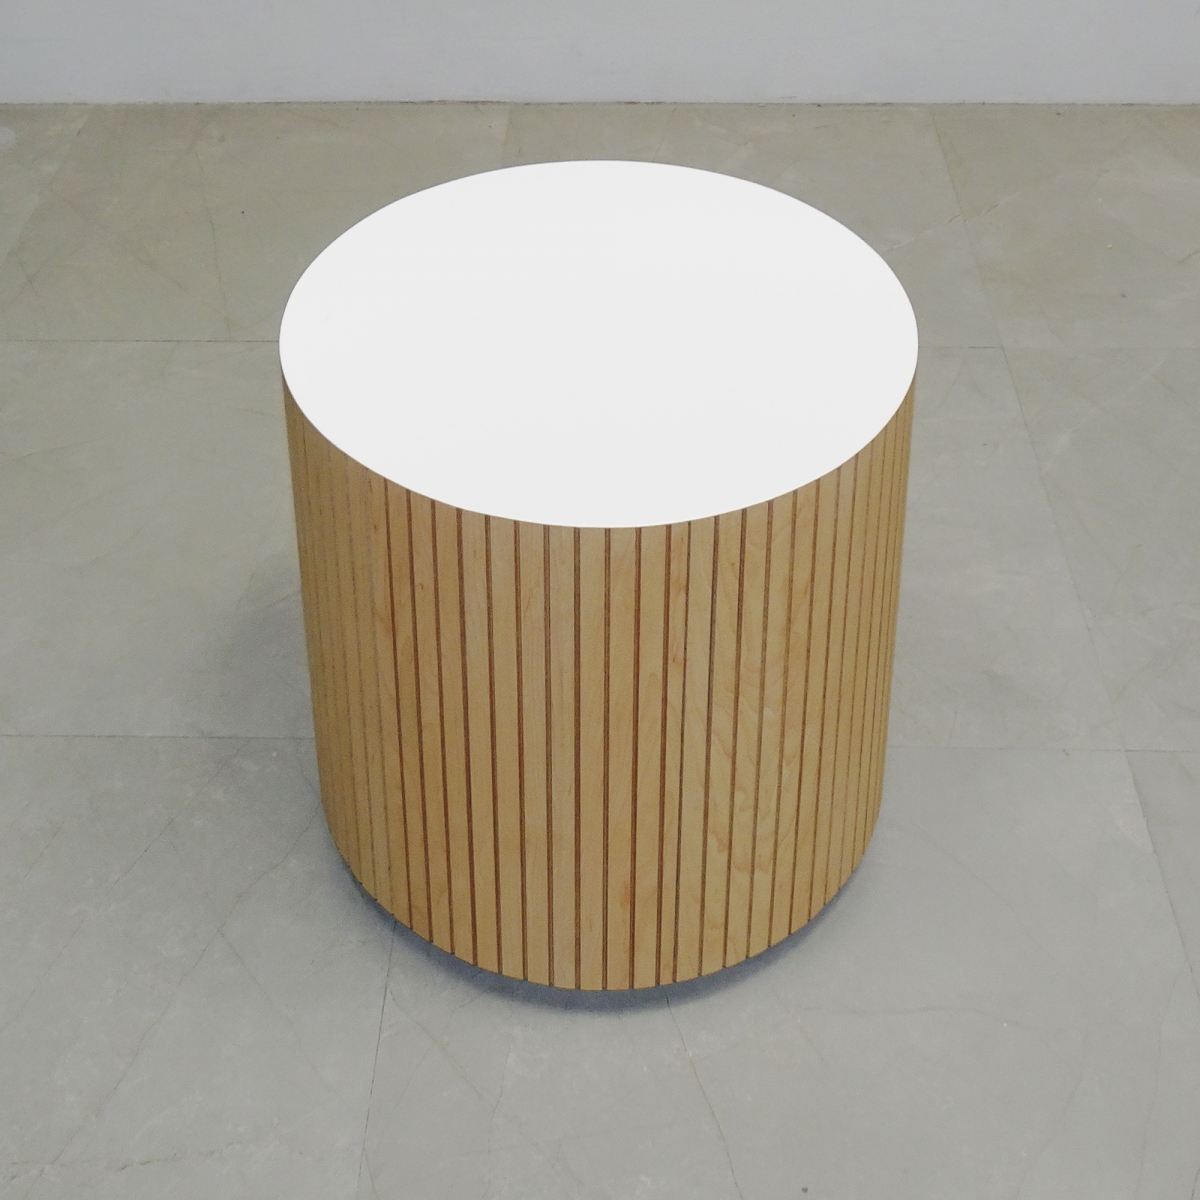 18 in. Axis Round Side Table - Stock # 1001-S